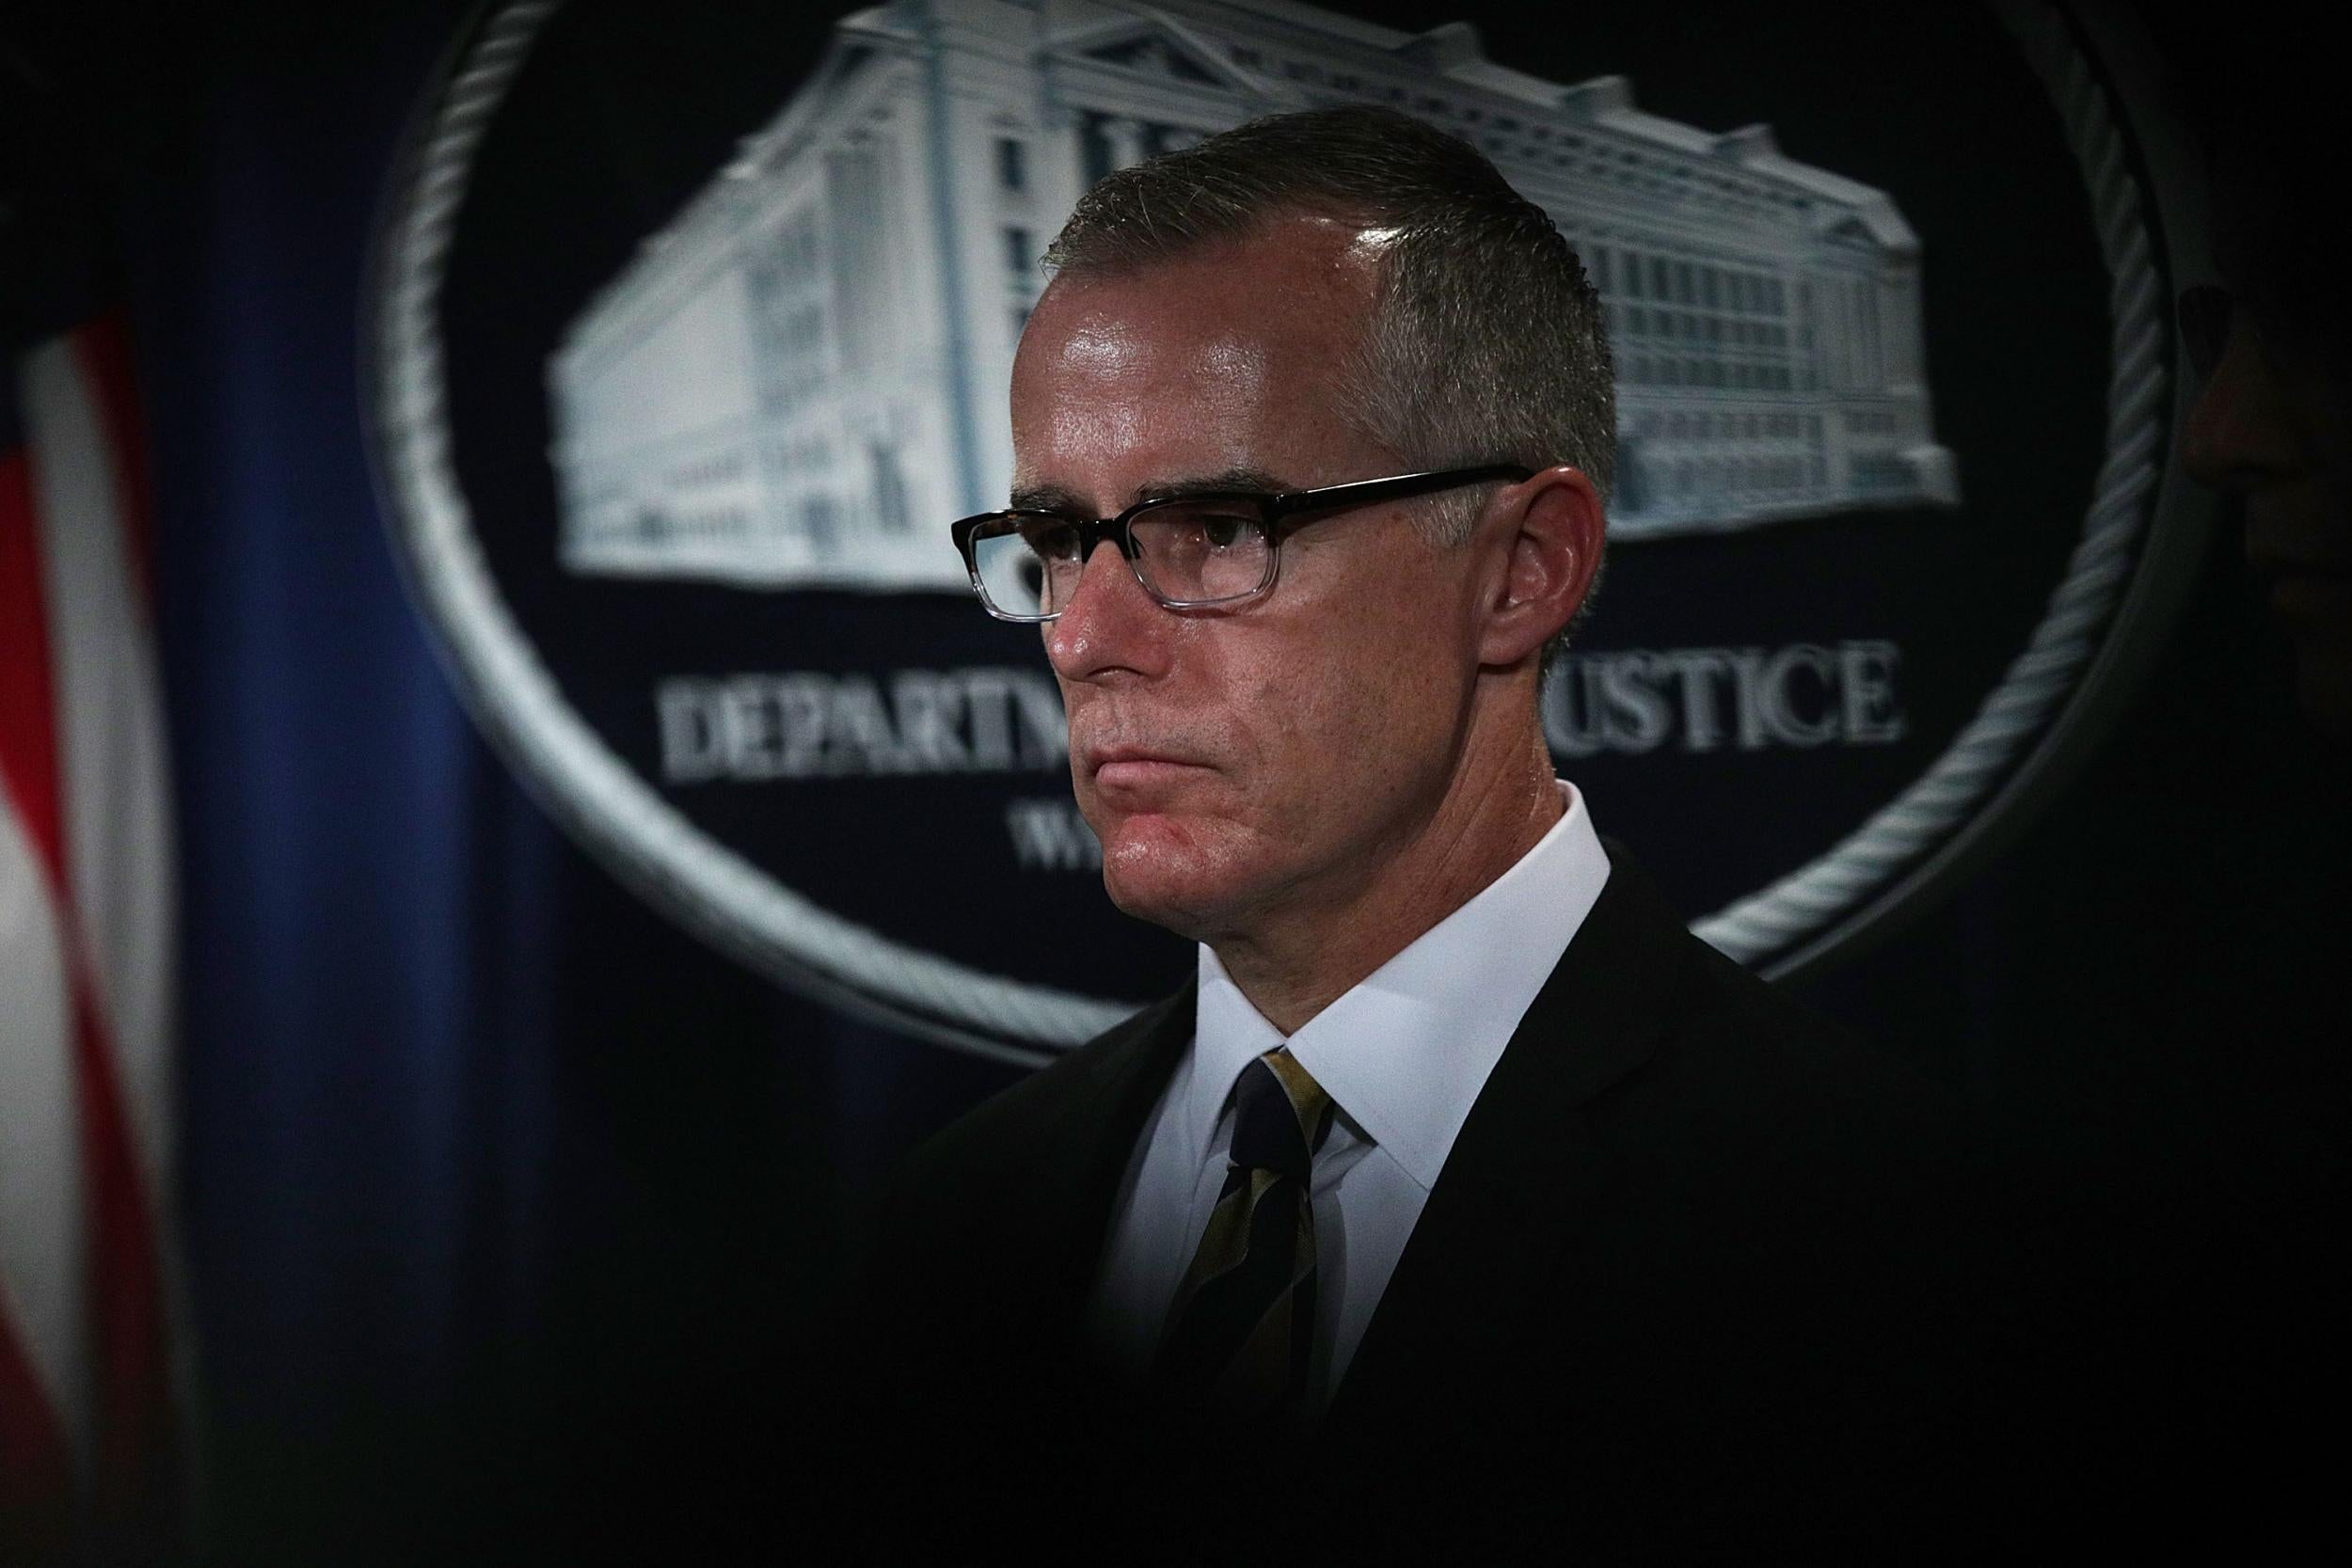 Andrew McCabe listens during a news conference to announce significant law enforcement actions